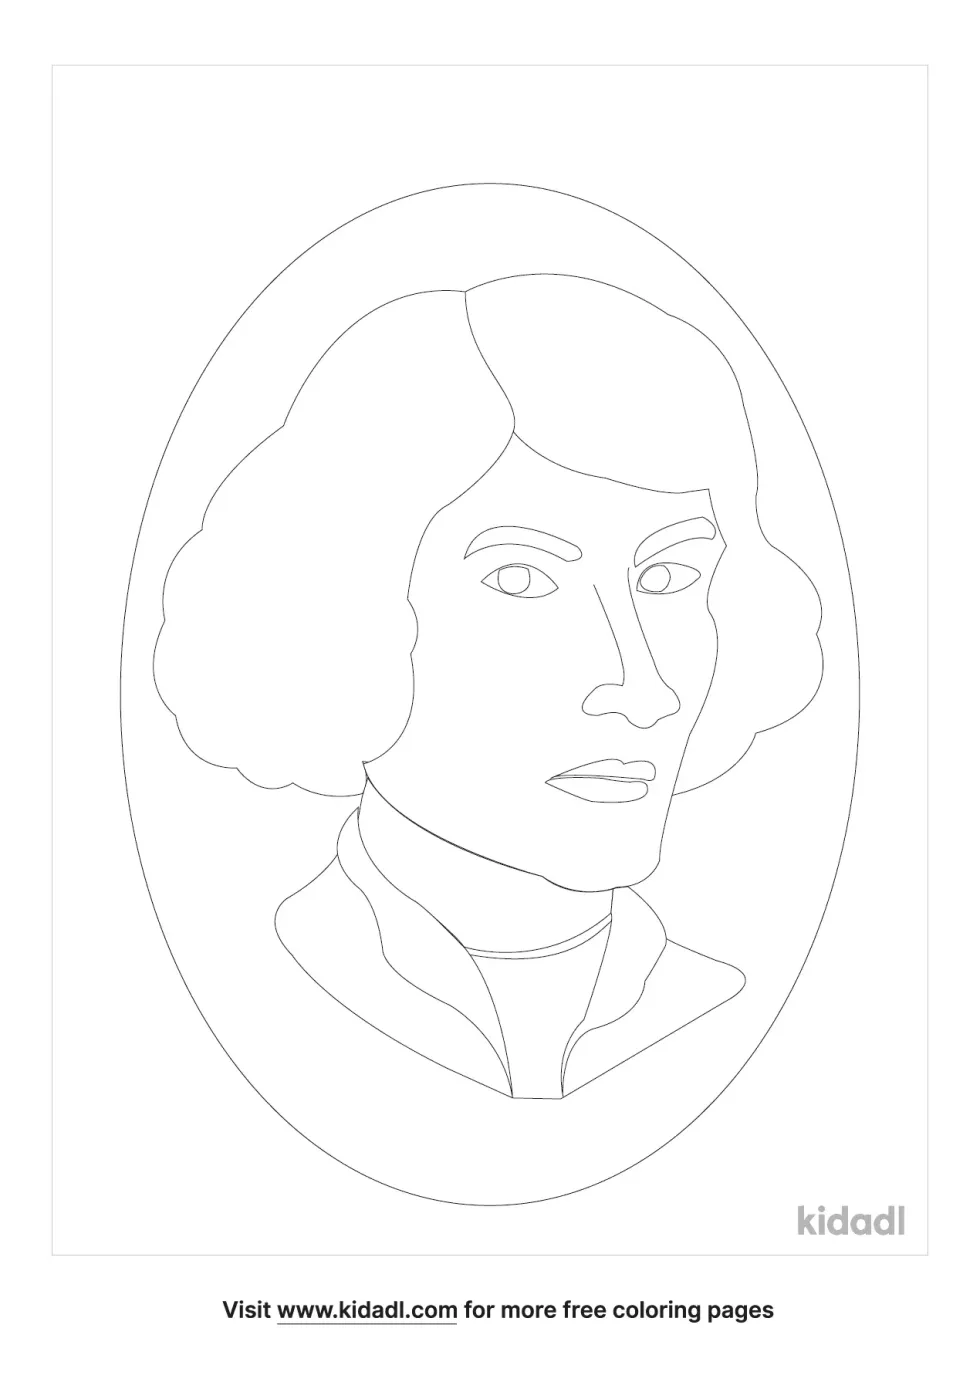 Nicolaus Copernicus Ooloring Page